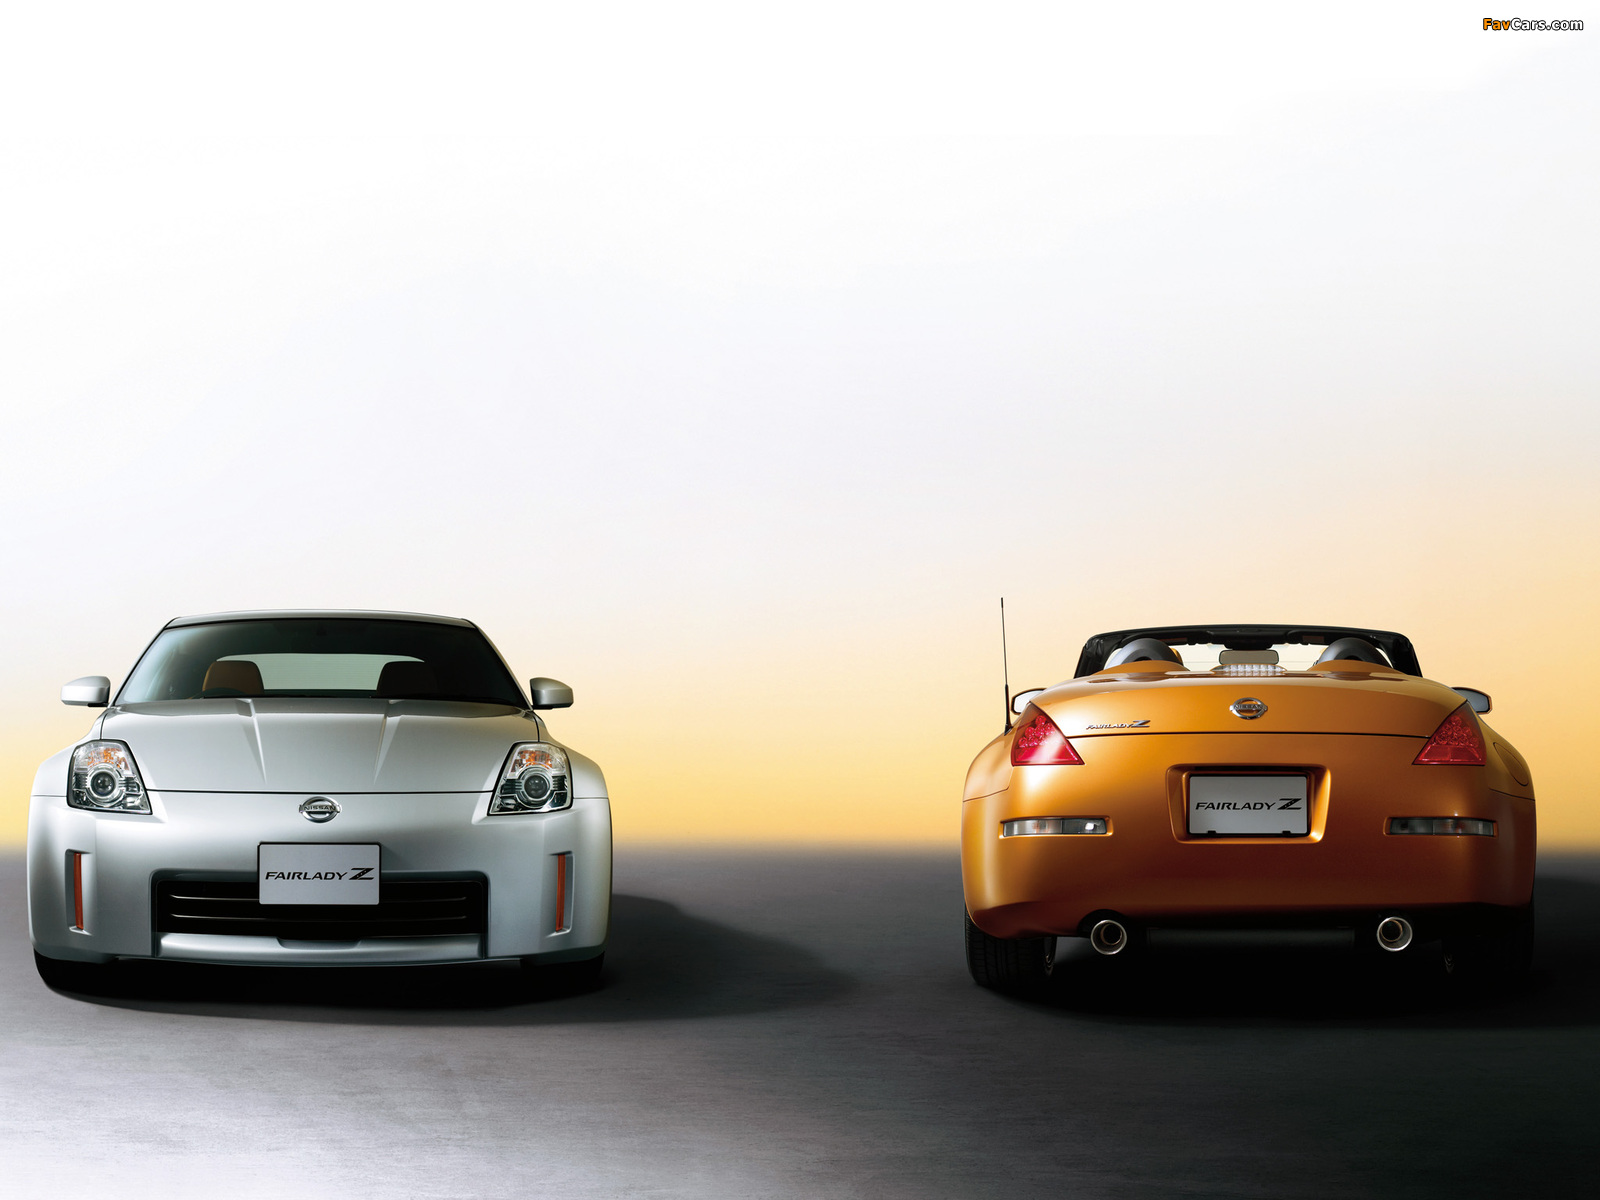 Images of Nissan Fairlady (1600 x 1200)